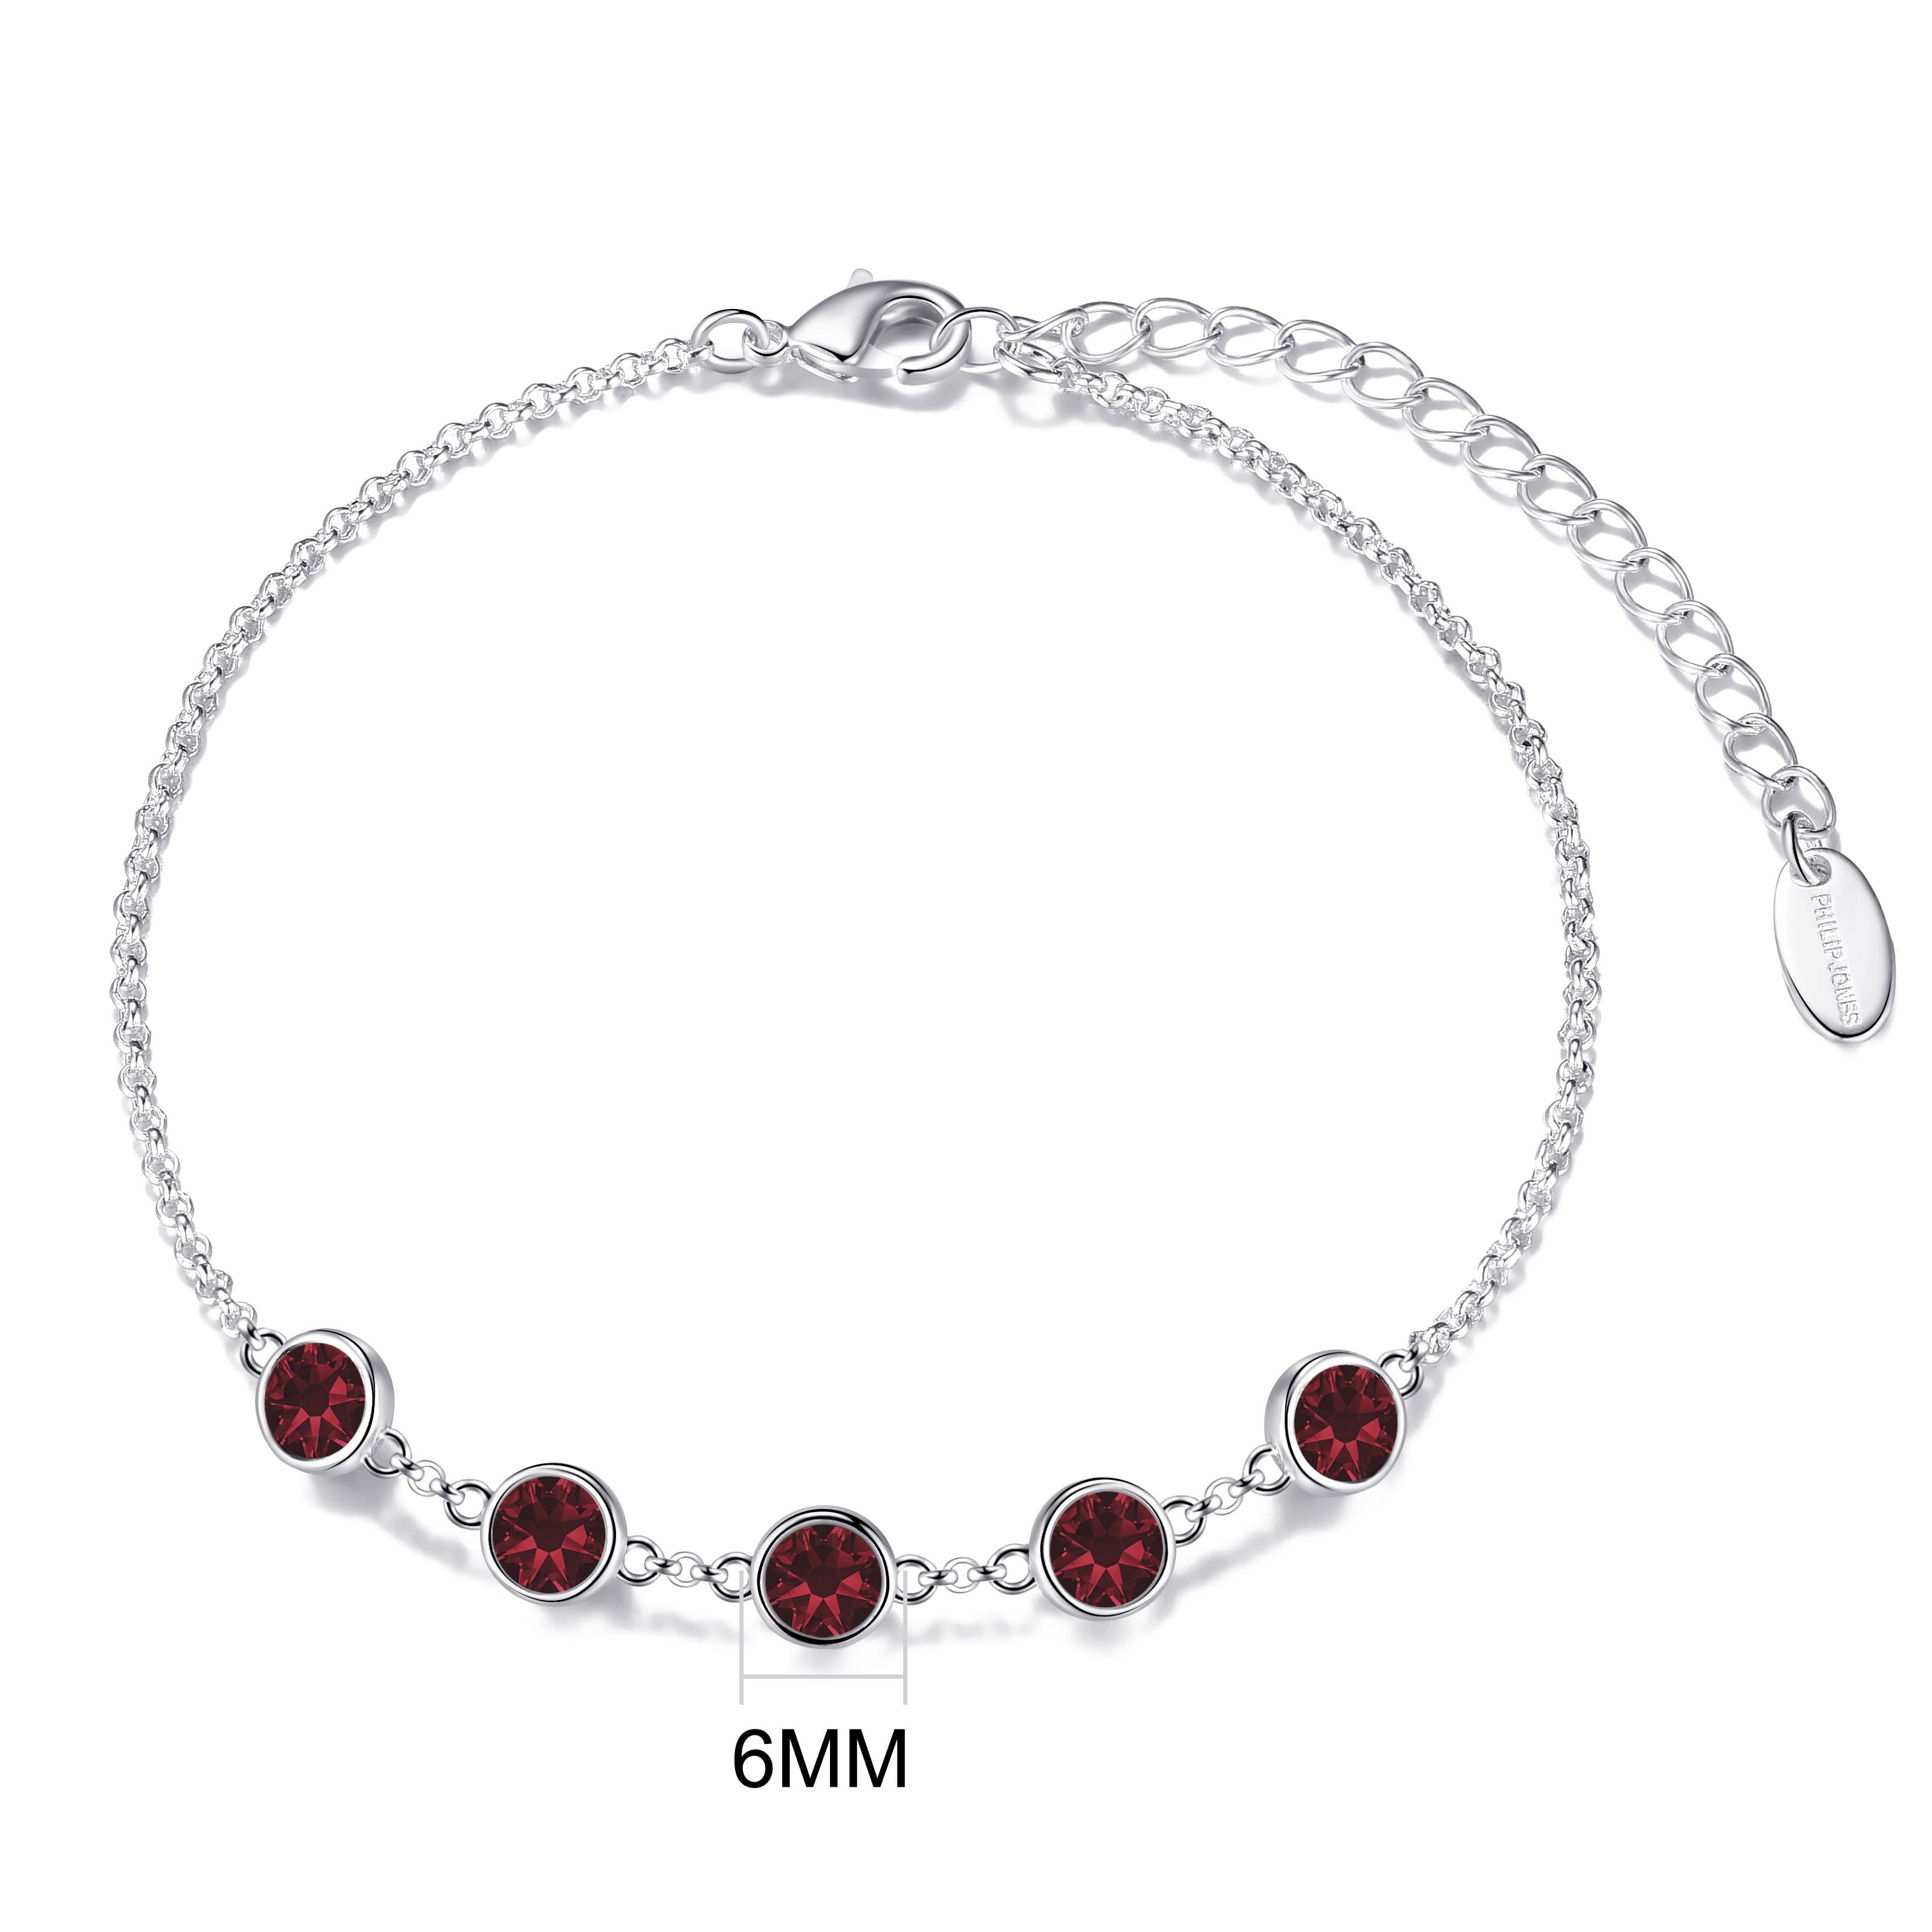 Dark Red Crystal Chain Bracelet Created with Zircondia® Crystals